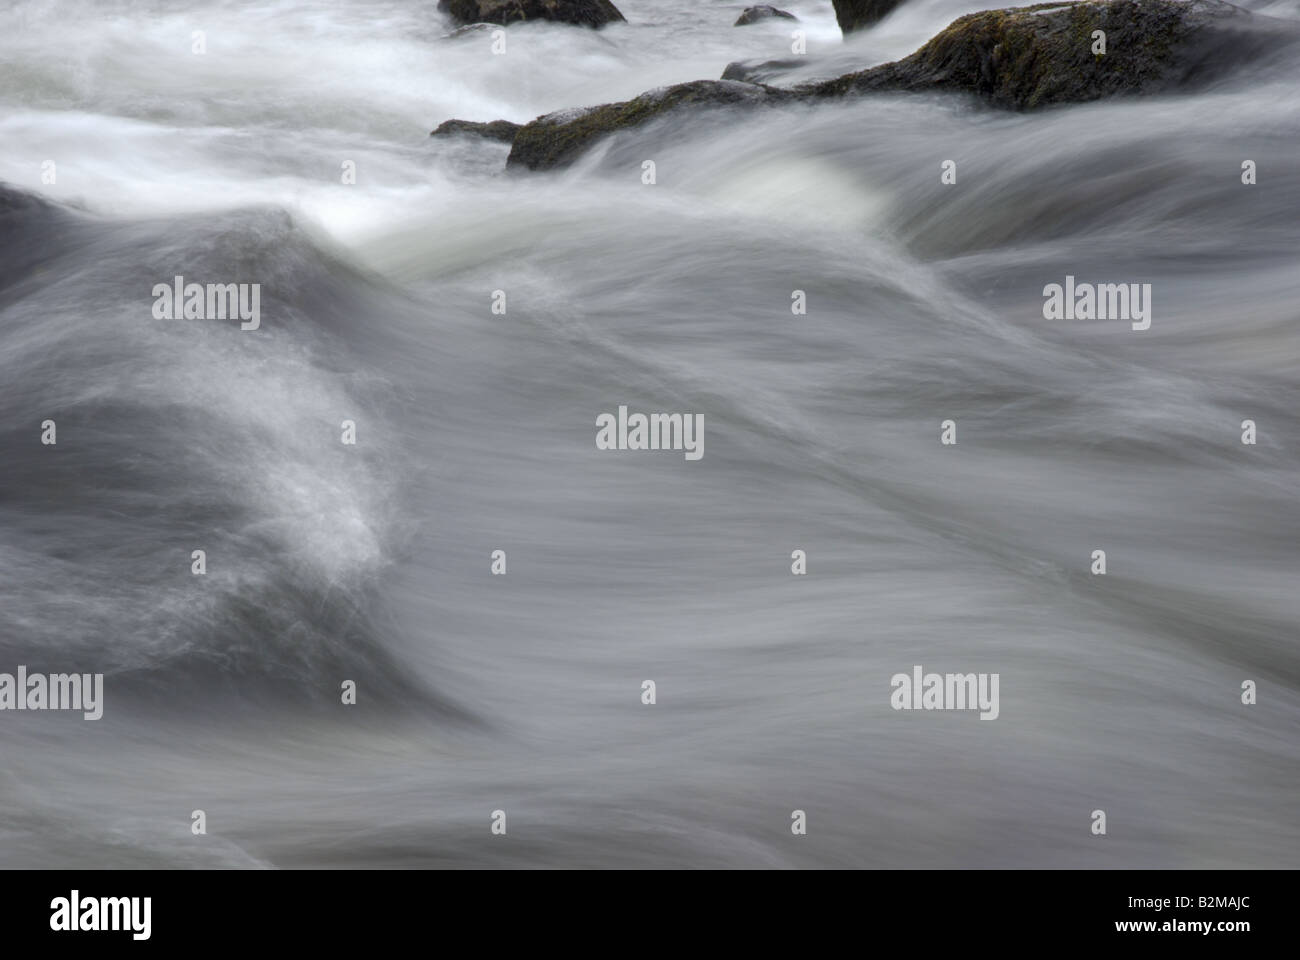 Fast Moving River Water flowing over stones in a series of rapids Stock Photo